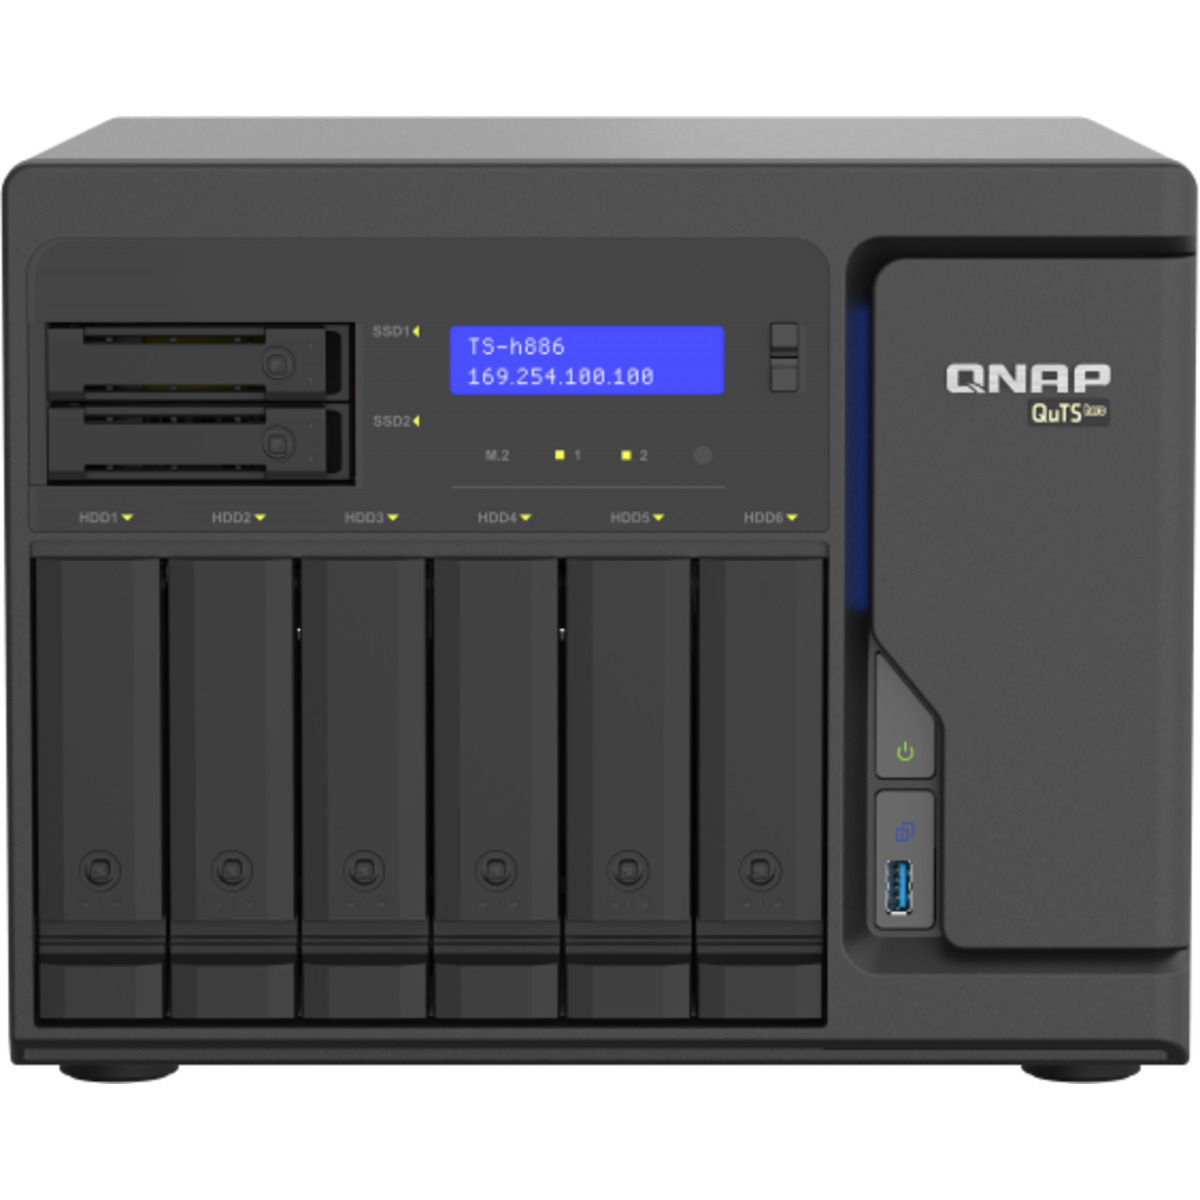 QNAP TS-h886 QuTS hero NAS 24tb 6+2-Bay Desktop Large Business / Enterprise NAS - Network Attached Storage Device 3x8tb Seagate IronWolf Pro ST8000NT001 3.5 7200rpm SATA 6Gb/s HDD NAS Class Drives Installed - Burn-In Tested - ON SALE TS-h886 QuTS hero NAS